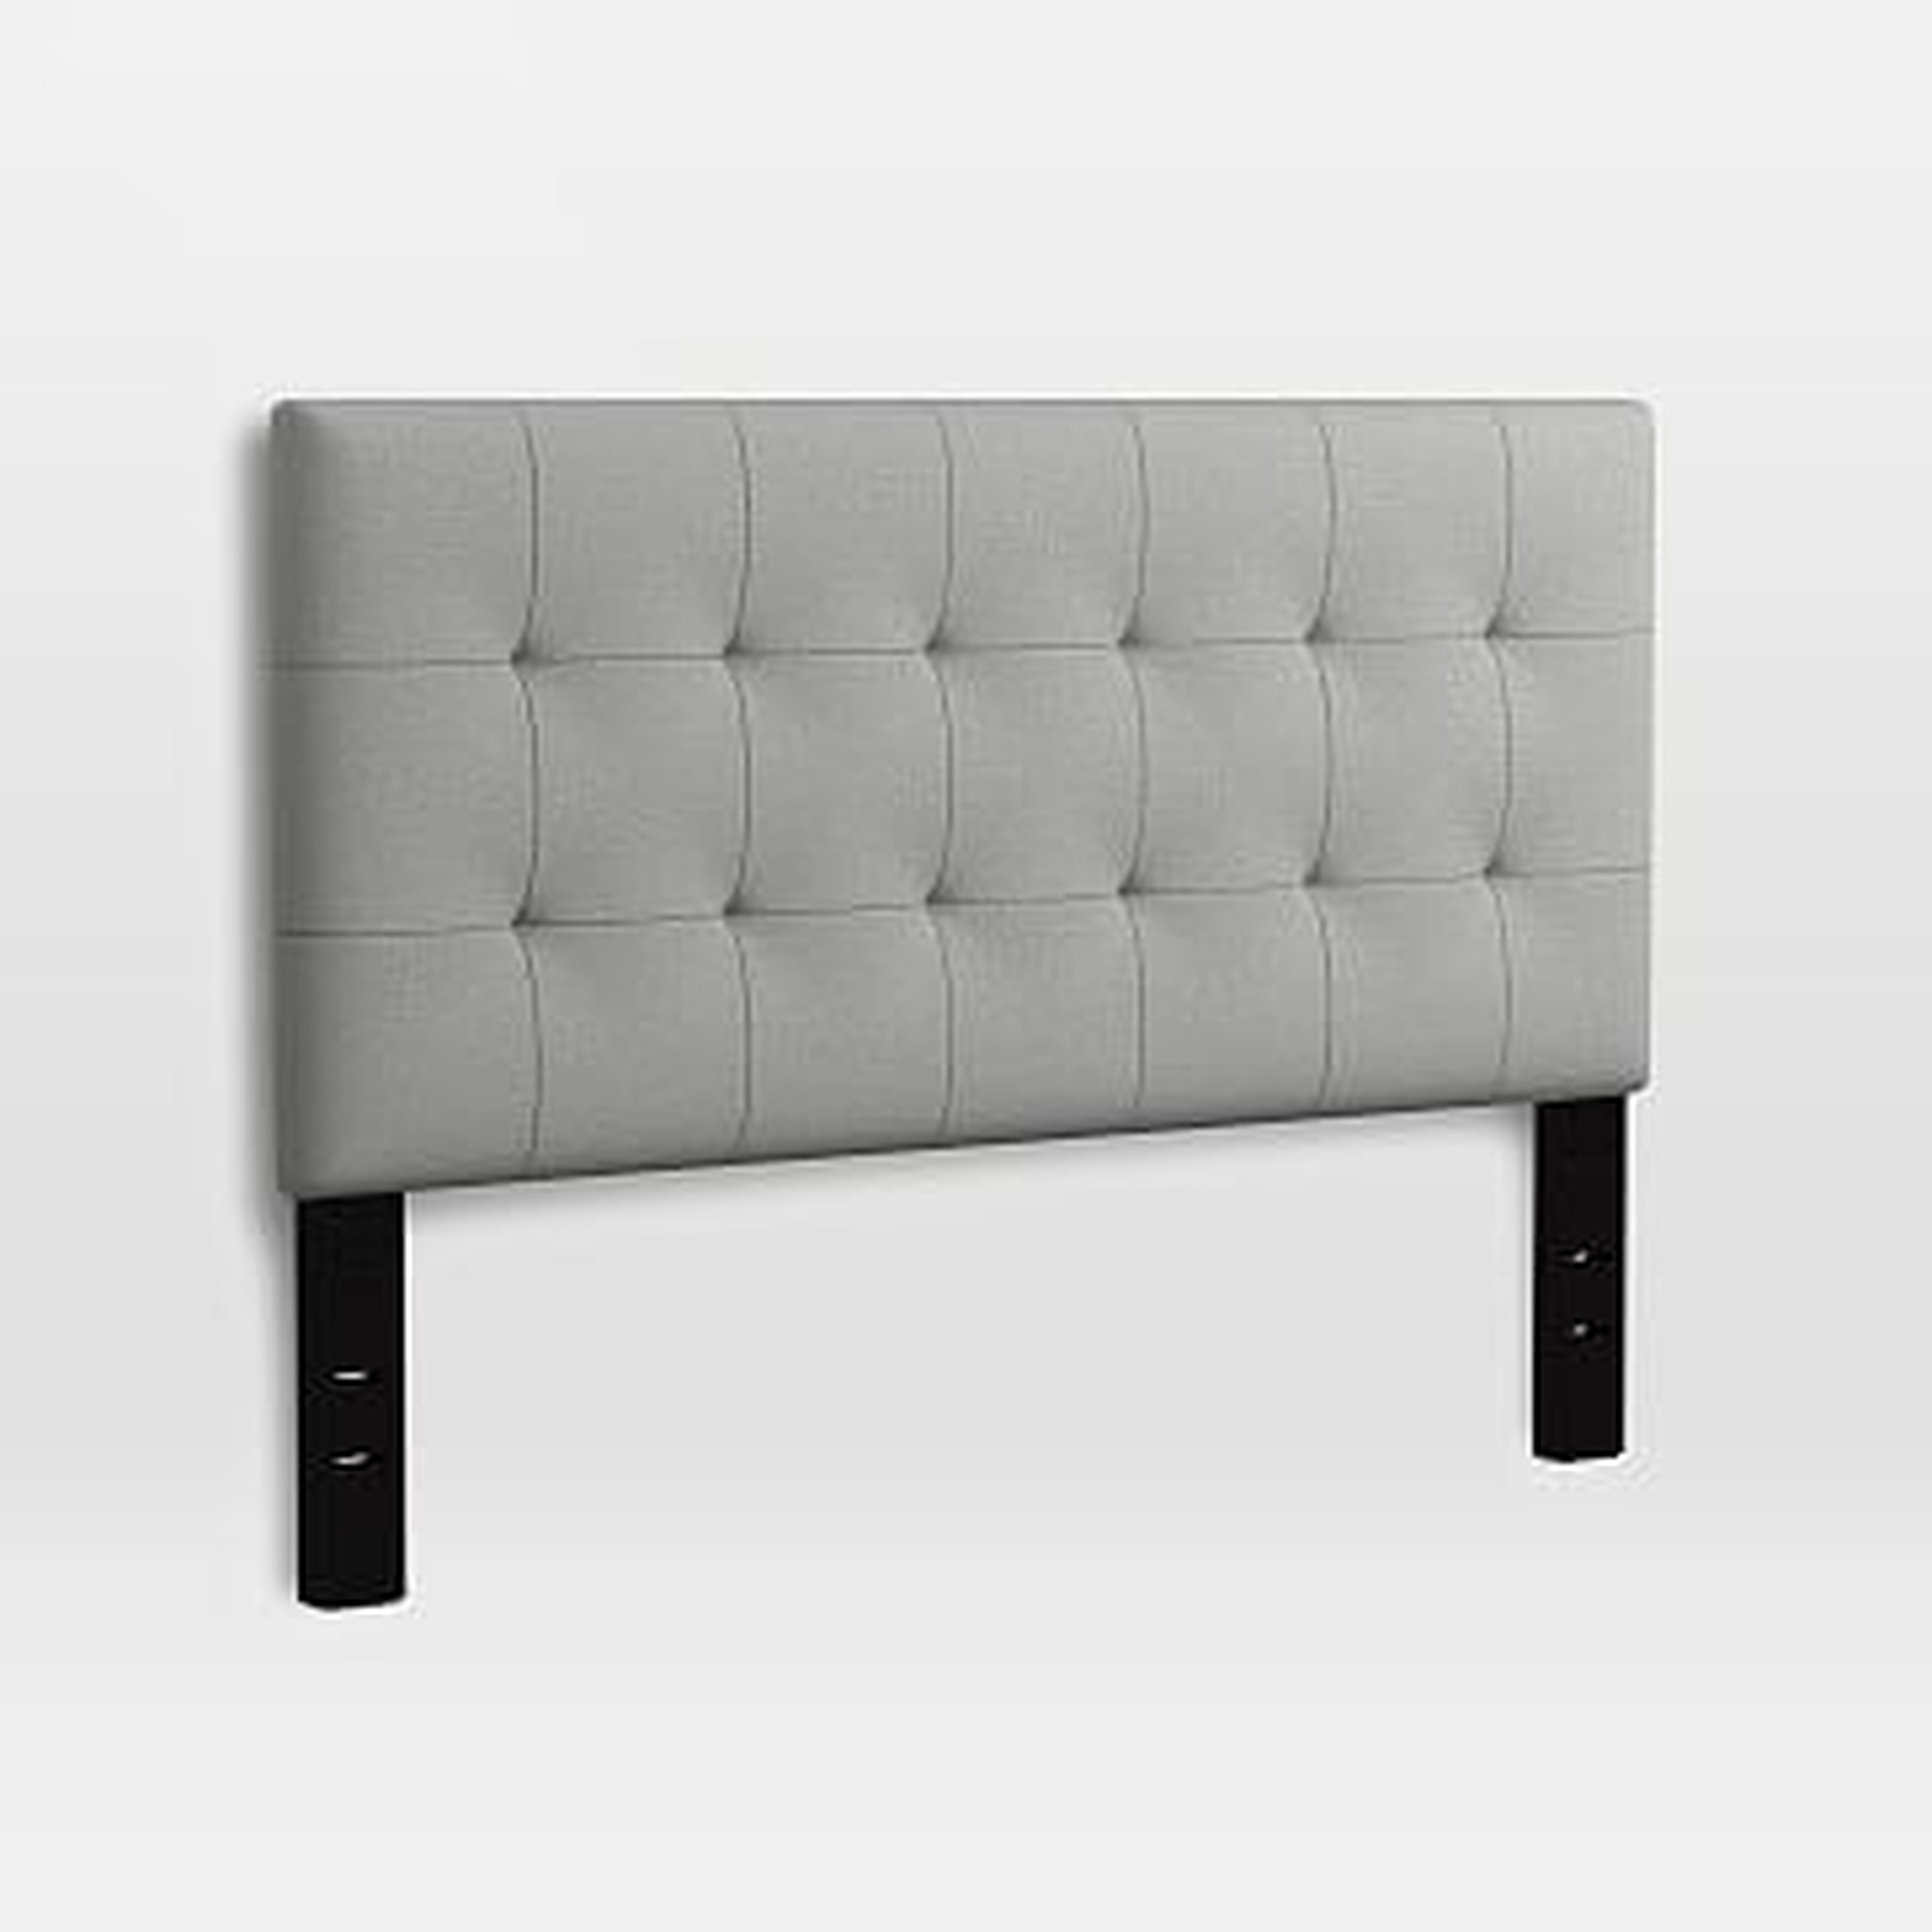 Grid Tufted Headboard, Queen, Heathered Crosshatch, Feather Gray - West Elm